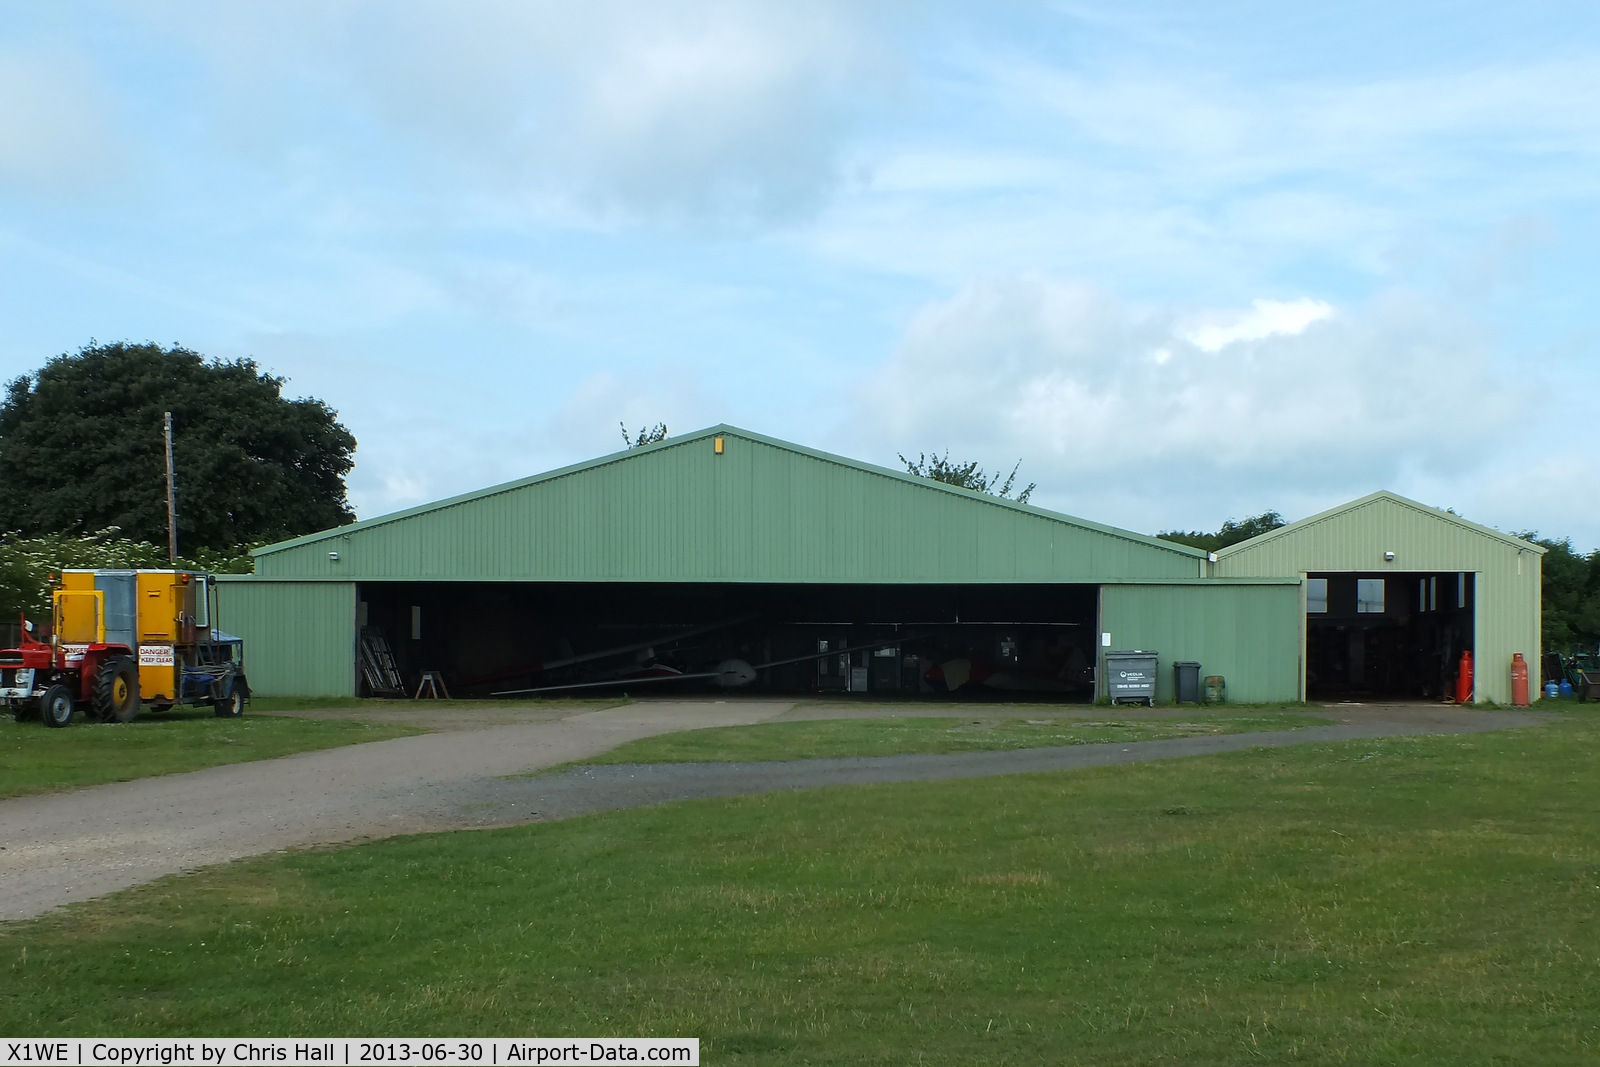 X1WE Airport - Oxford Gliding Club hangar at Weston on the Green